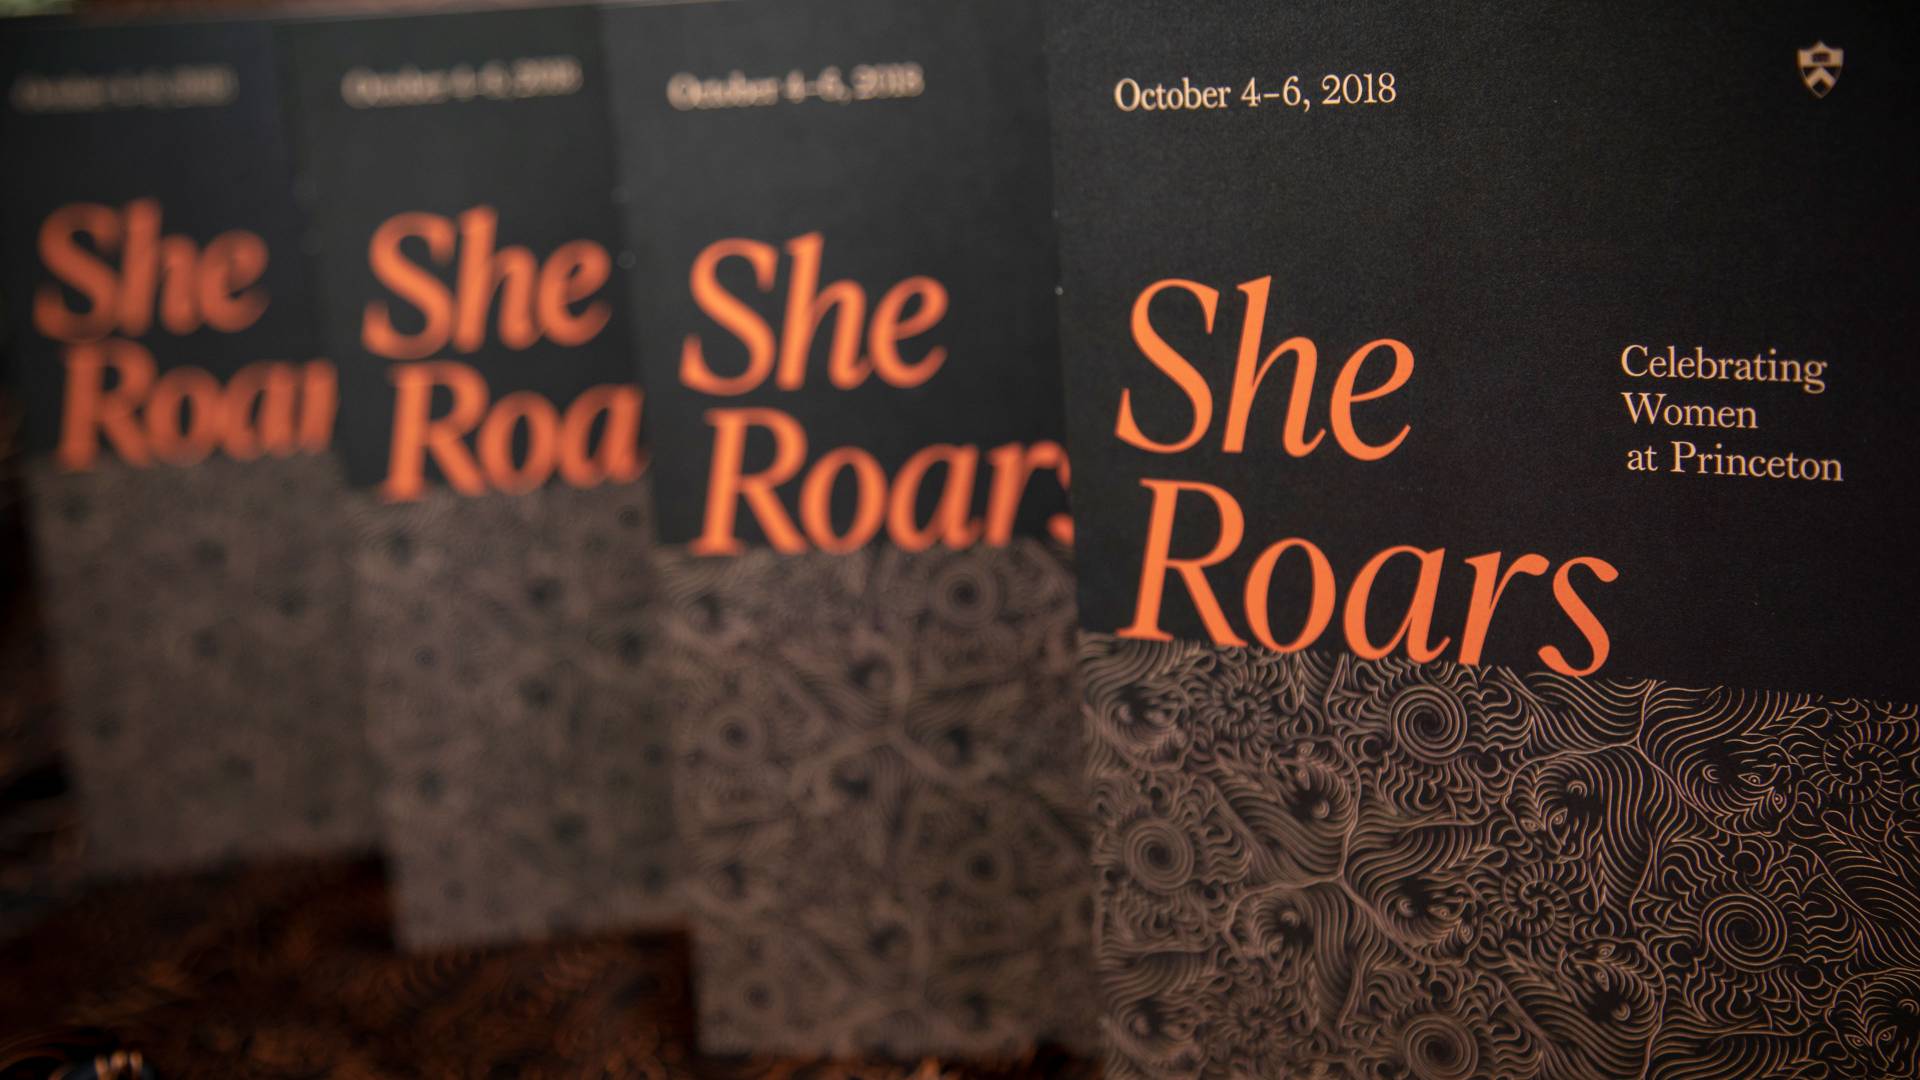 Array of She Roars programs that say "October 4-6, 2018; She Roars; Celebrating Women at Princeton"